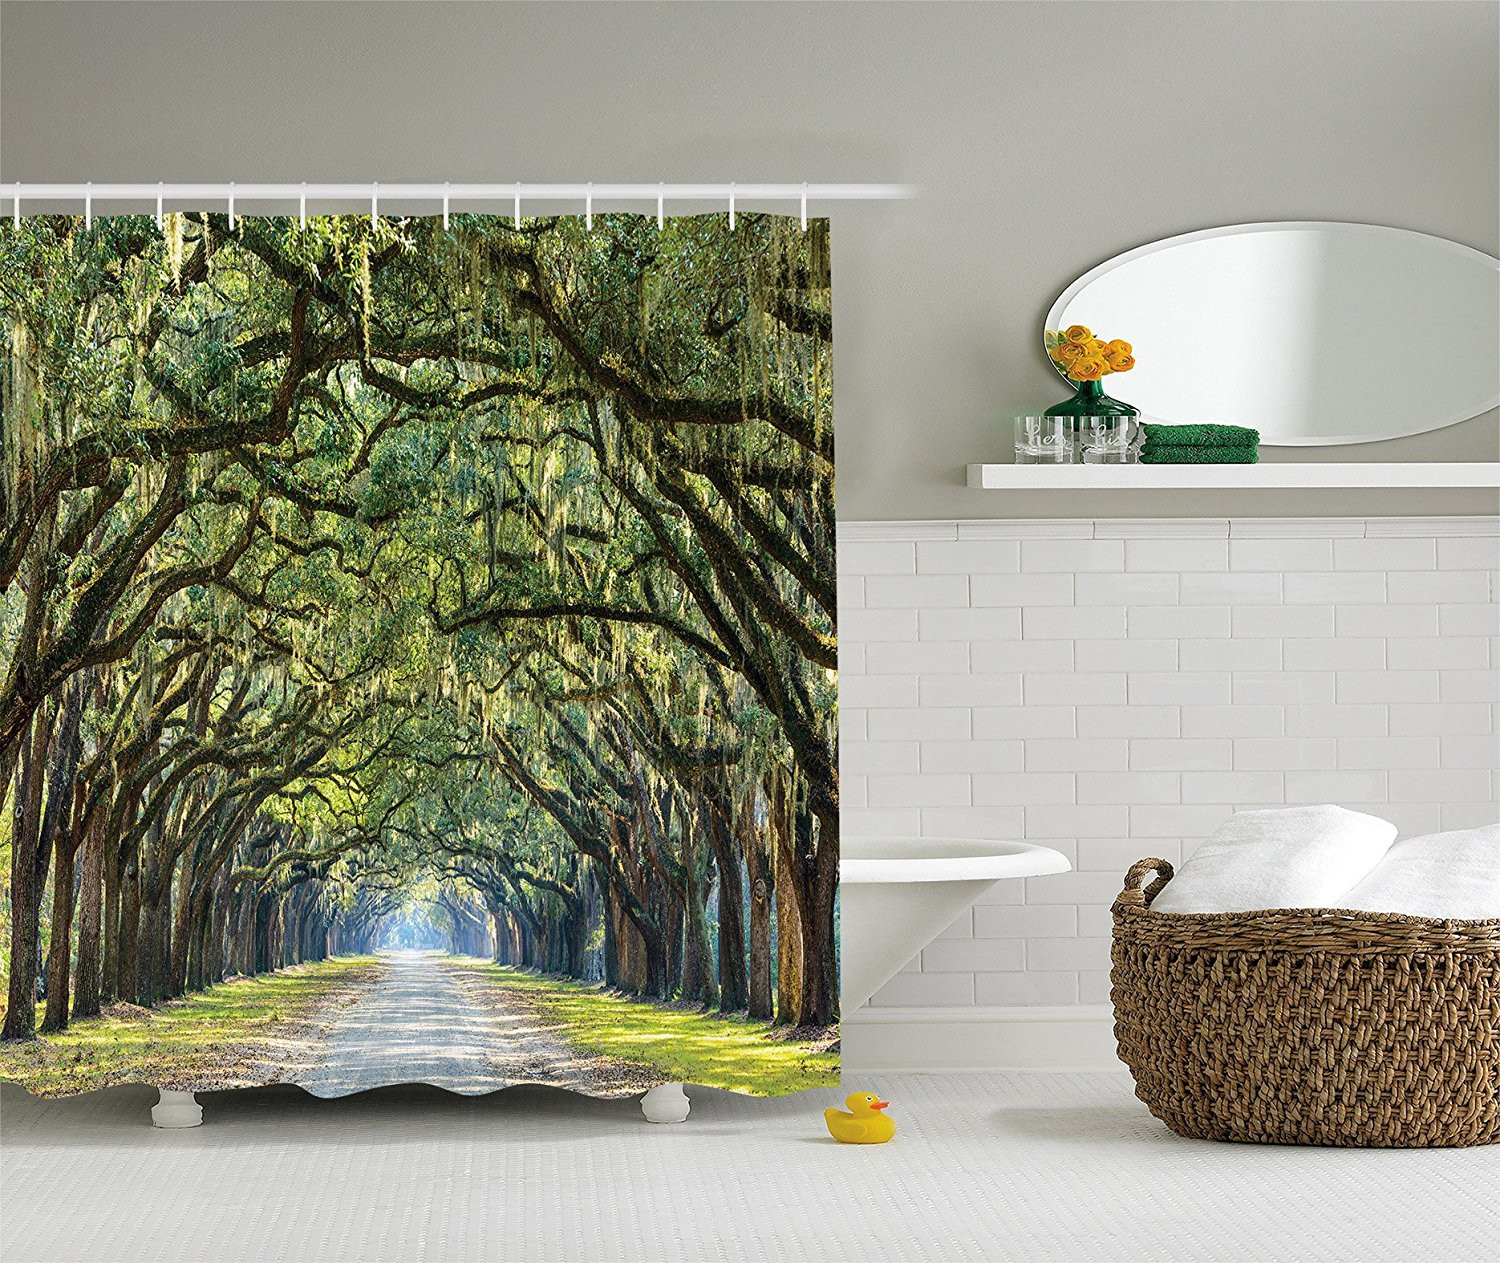 Country Bathroom Shower Curtains
 Forest Shower Curtain Green Woodland Country Tree Branches